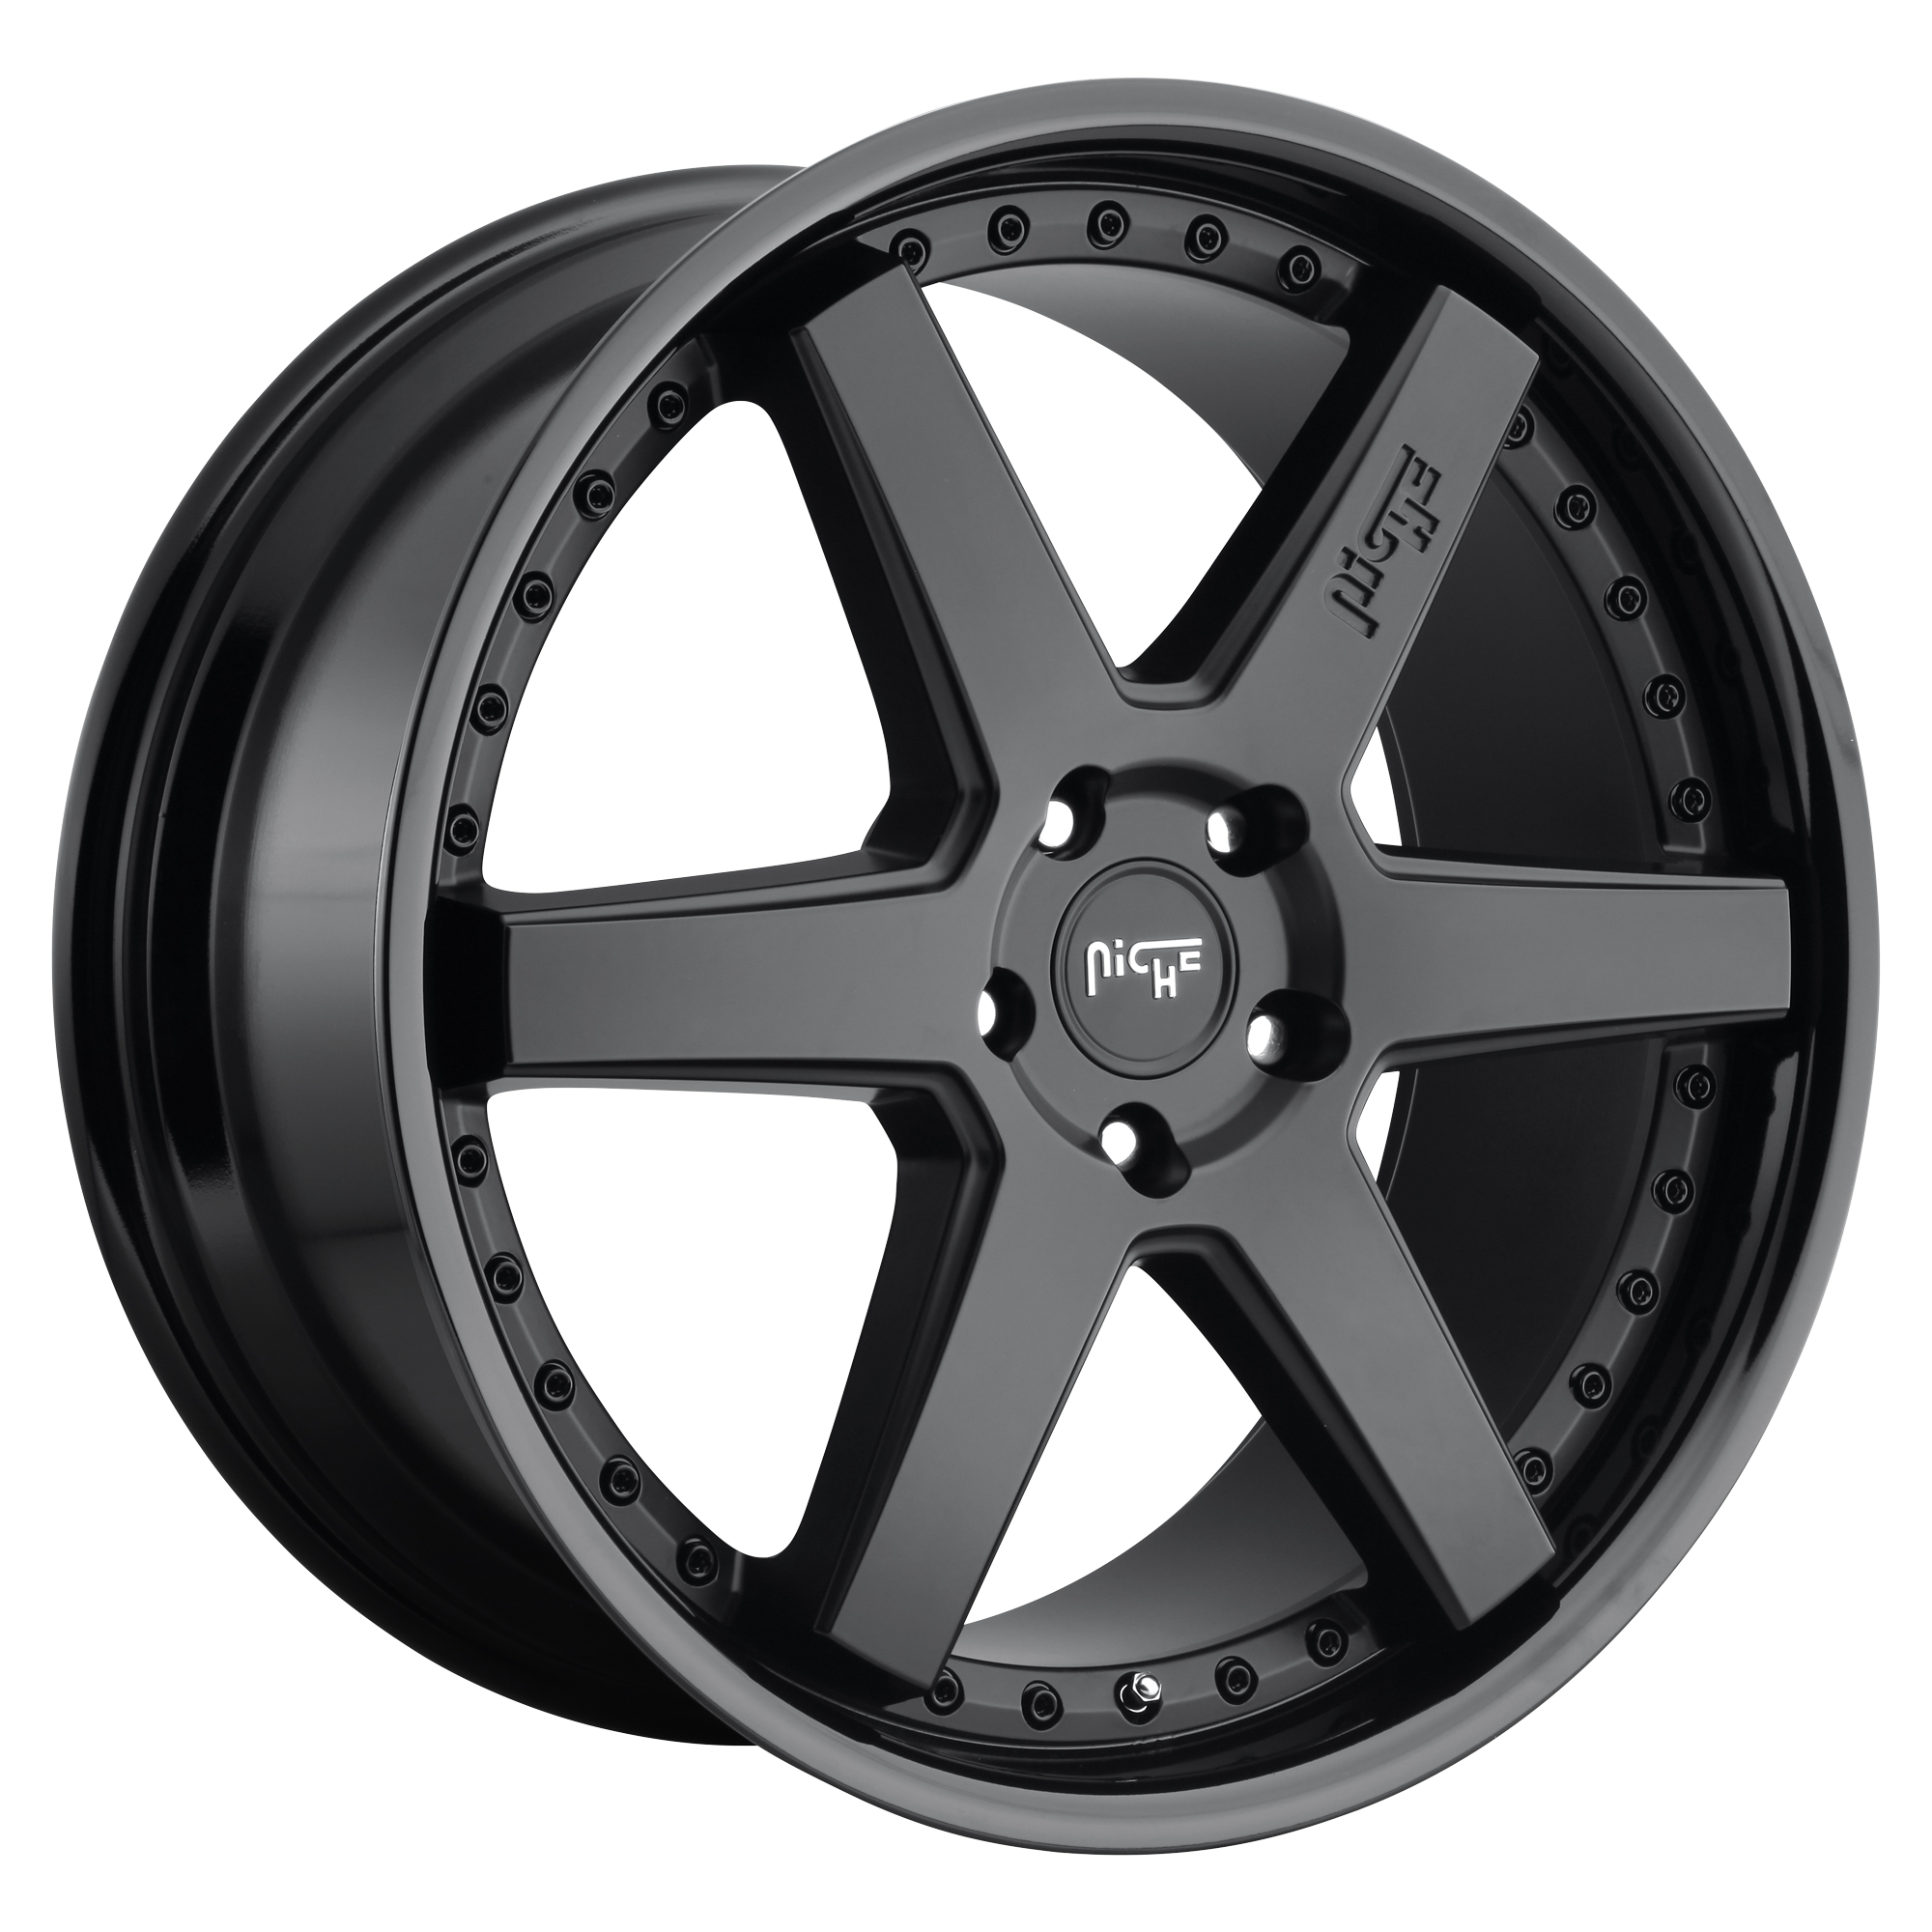 ALTAIR 19x10 5x114.30 GLOSS BLACK MATTE BLACK (40 mm) - Tires and Engine Performance